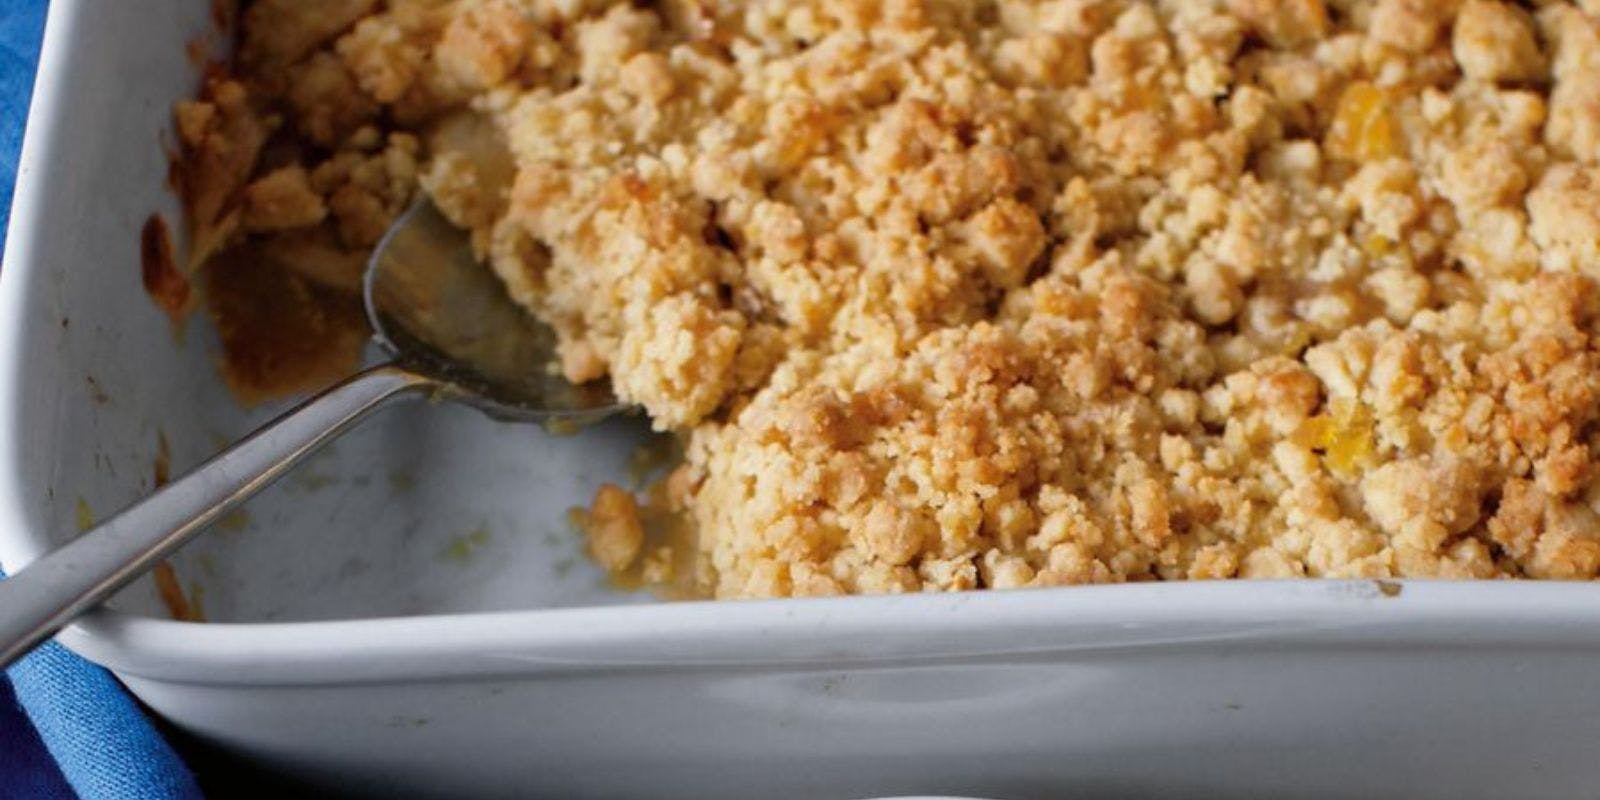 Wintry Apple Bake with Double Ginger Crumble